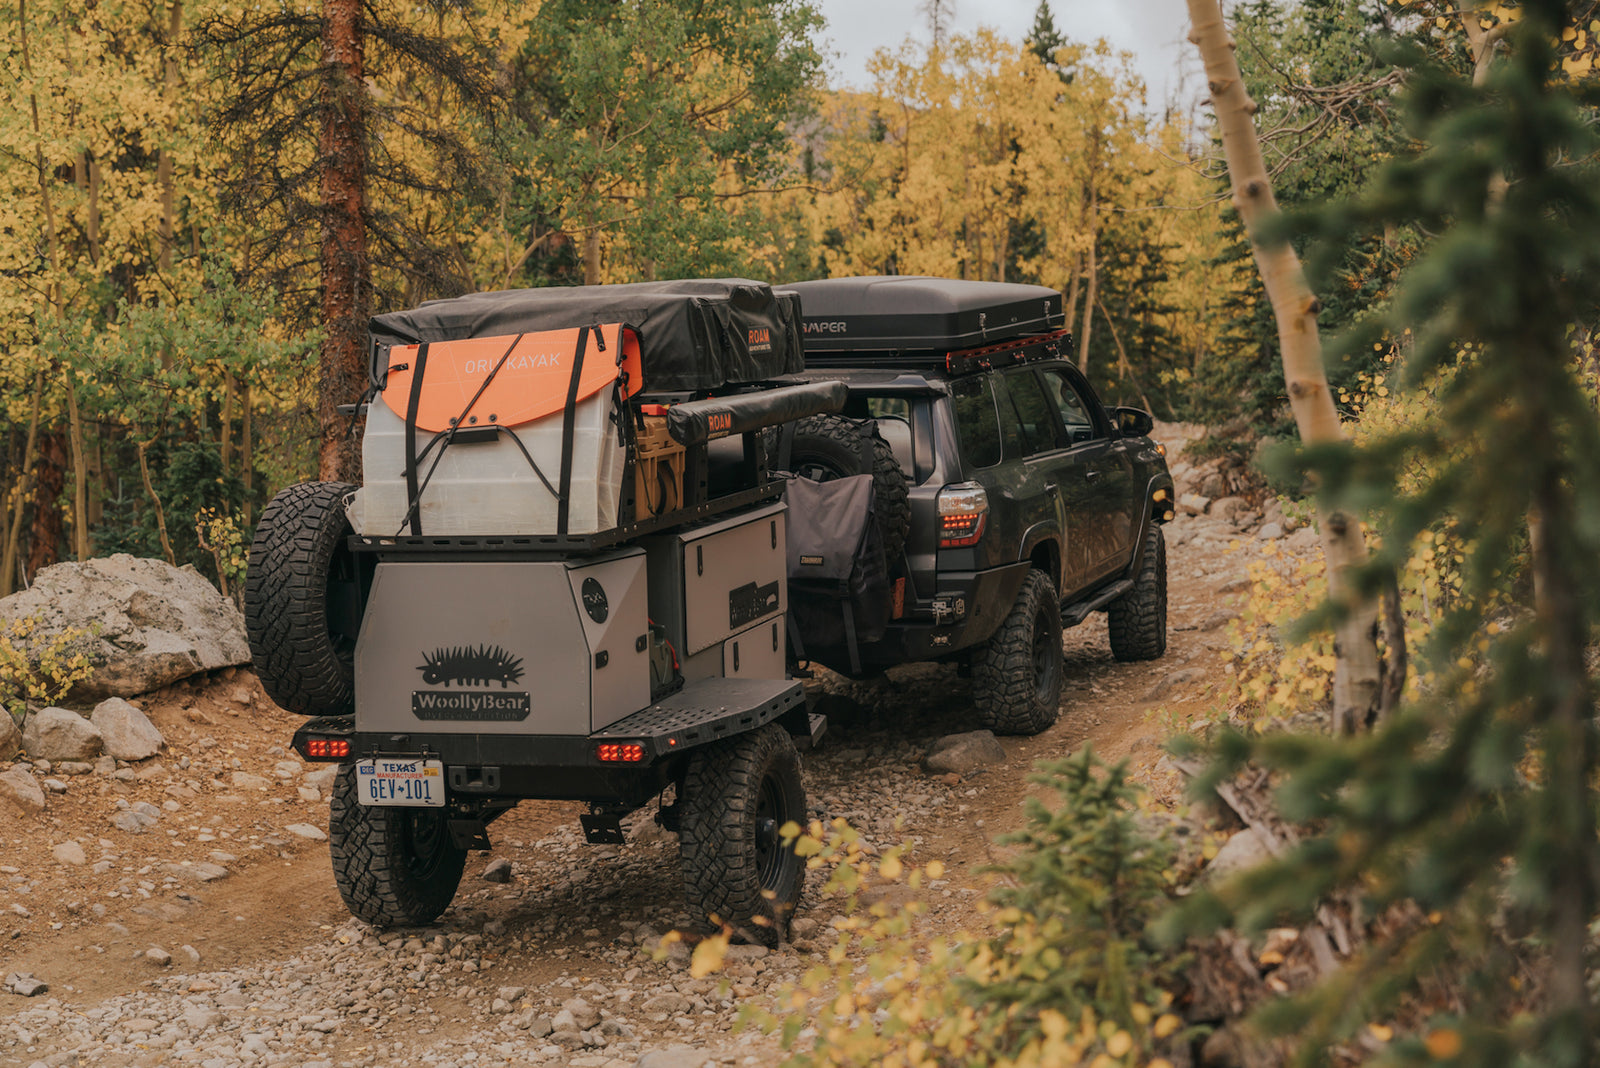 Habitat Offroad - Off-Road and Overland Gear and Accessories